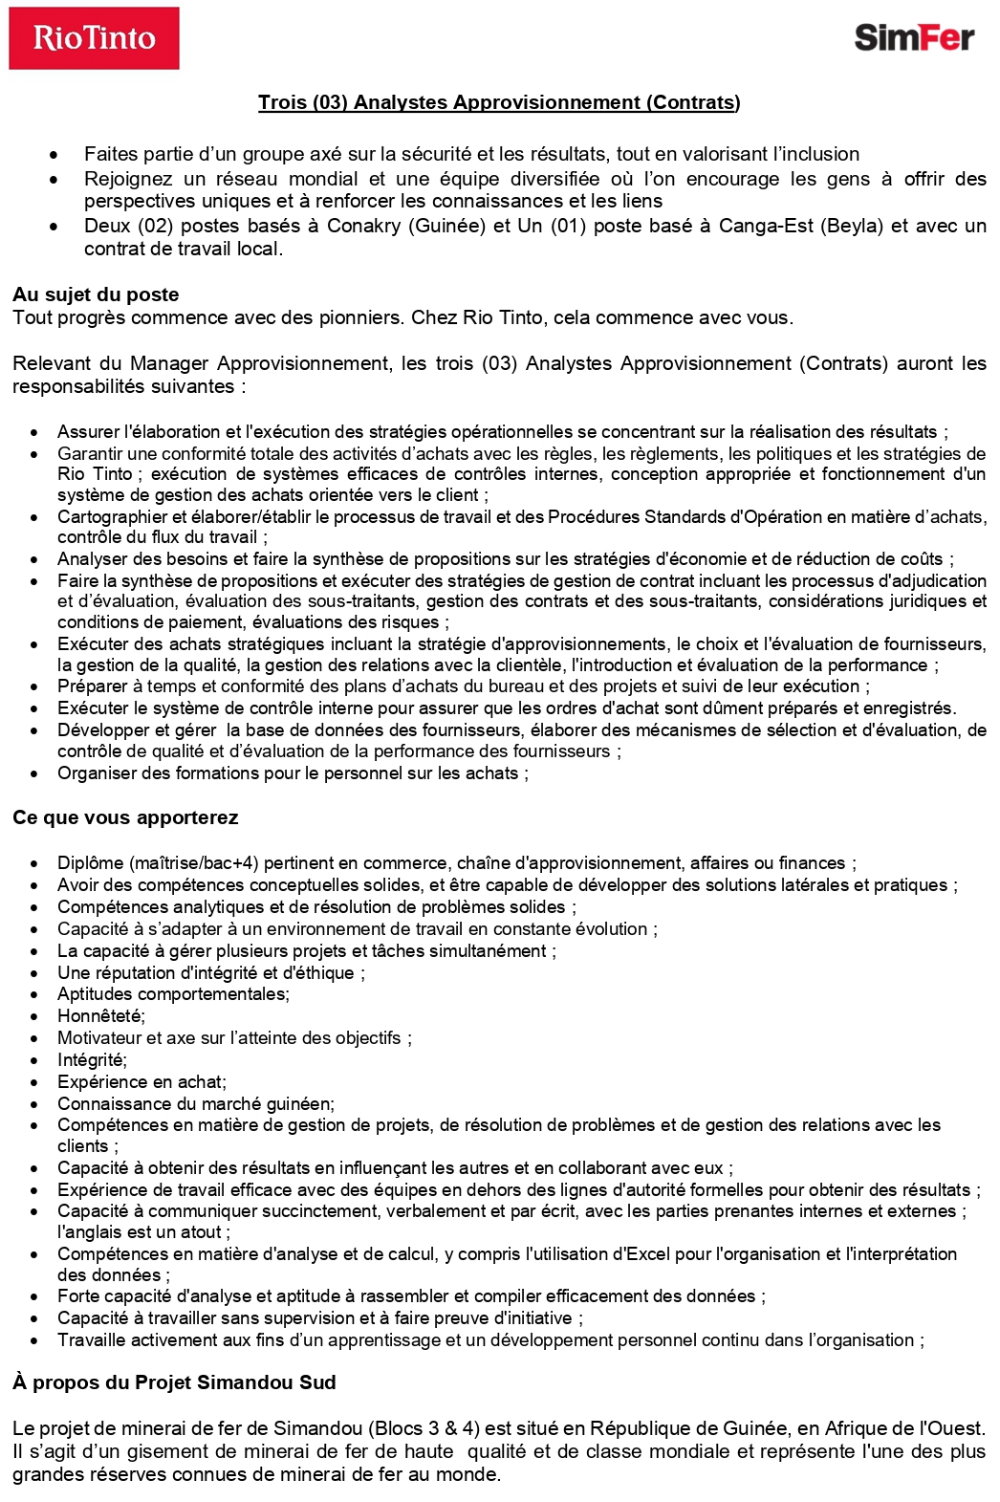 Trois (03) Analystes Approvisionnement (Contrats) | Page 1